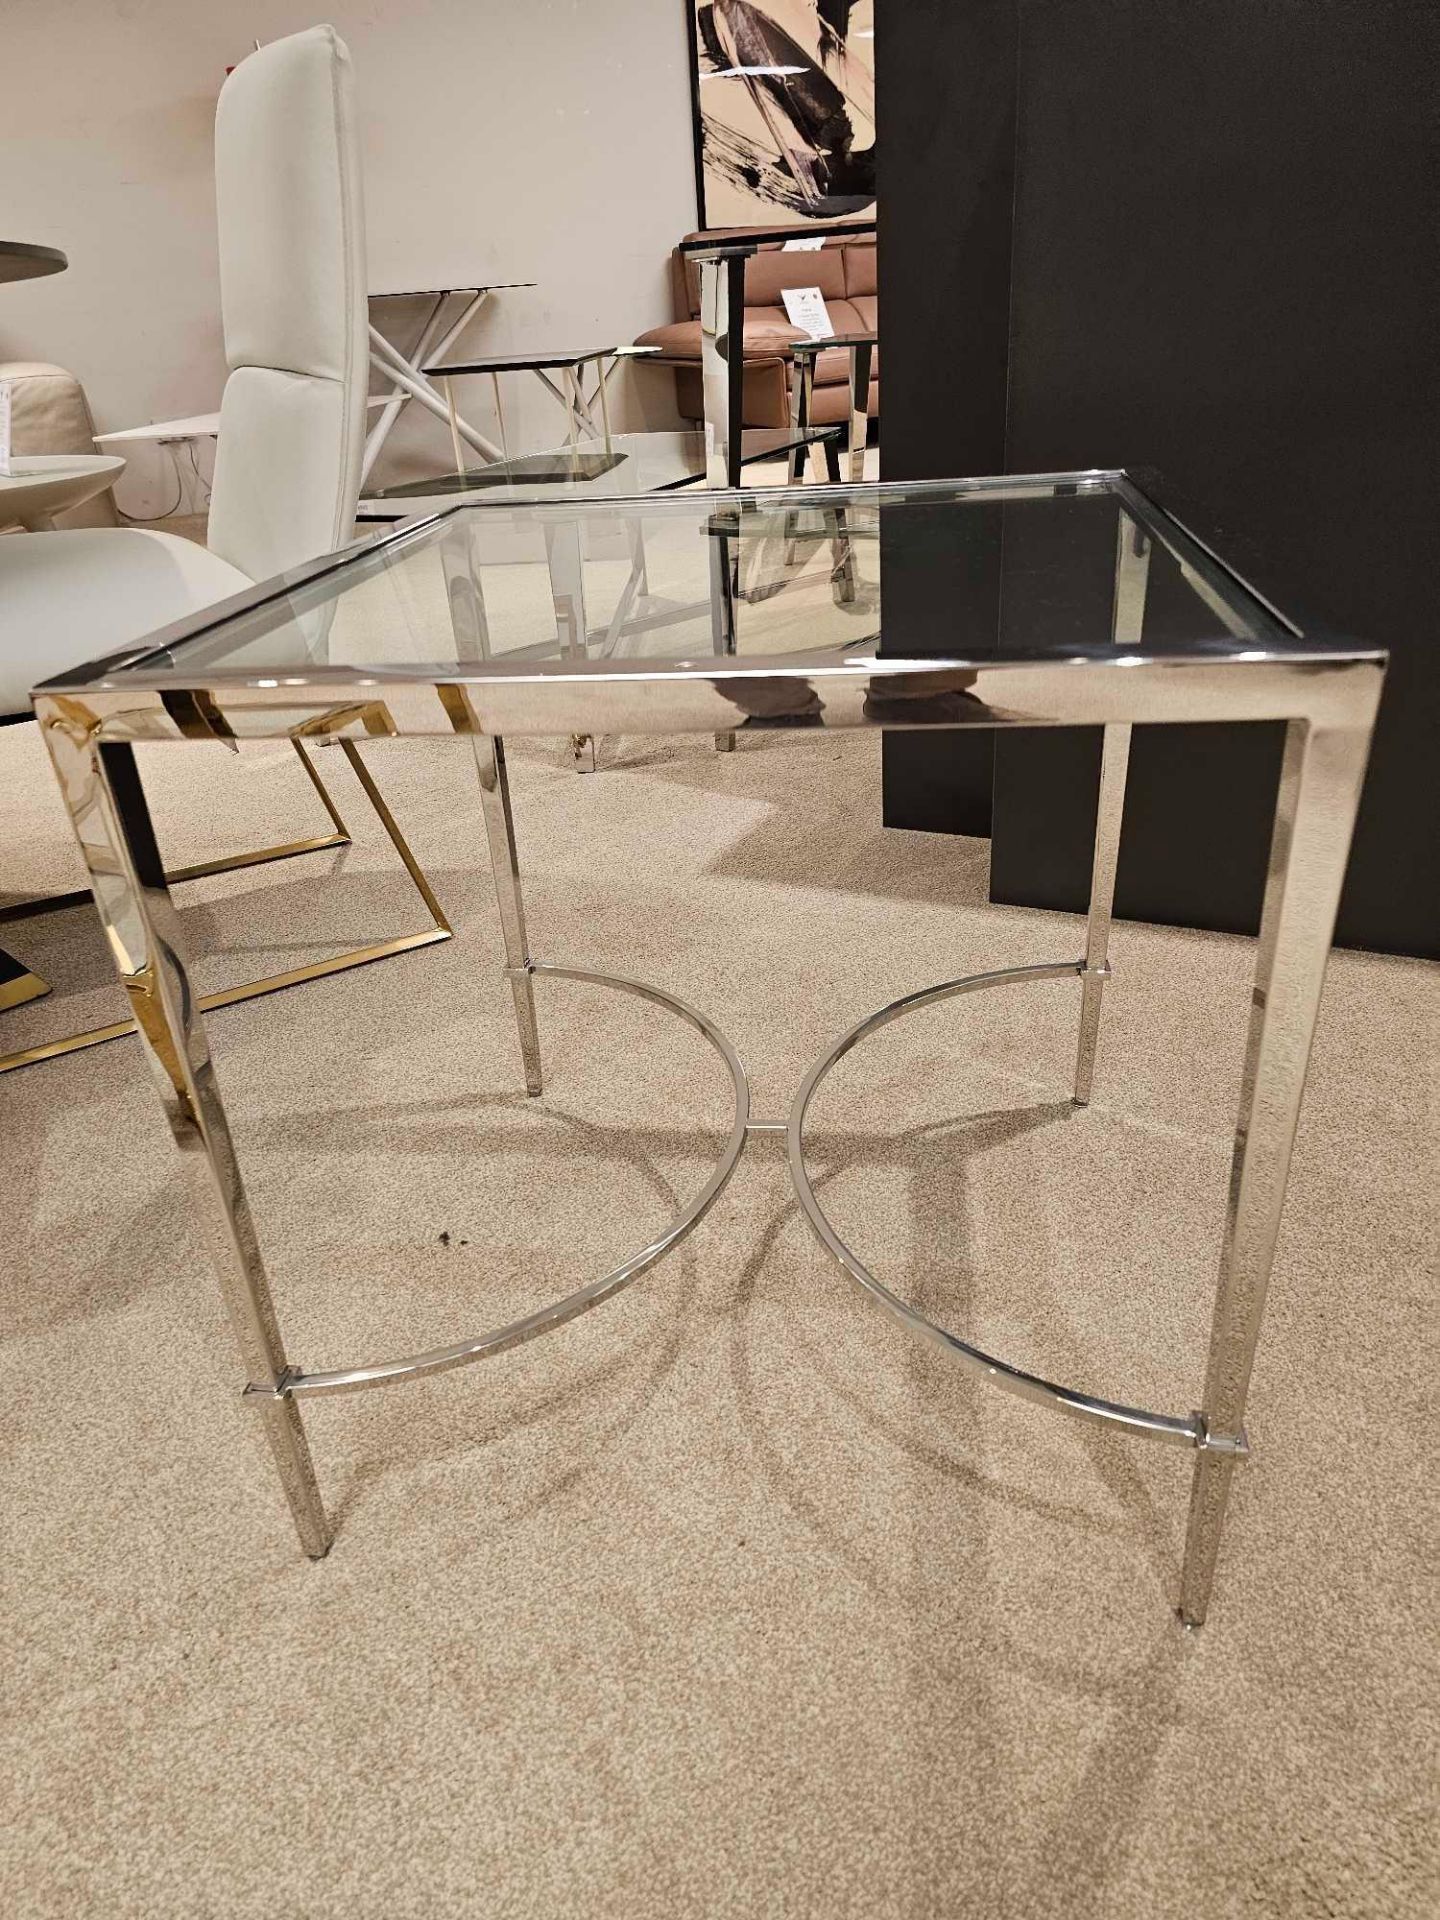 Tokyo Lamp Table by Kesterport The Tokyo lamp table with its clear glass top and a refined tapered - Image 4 of 6